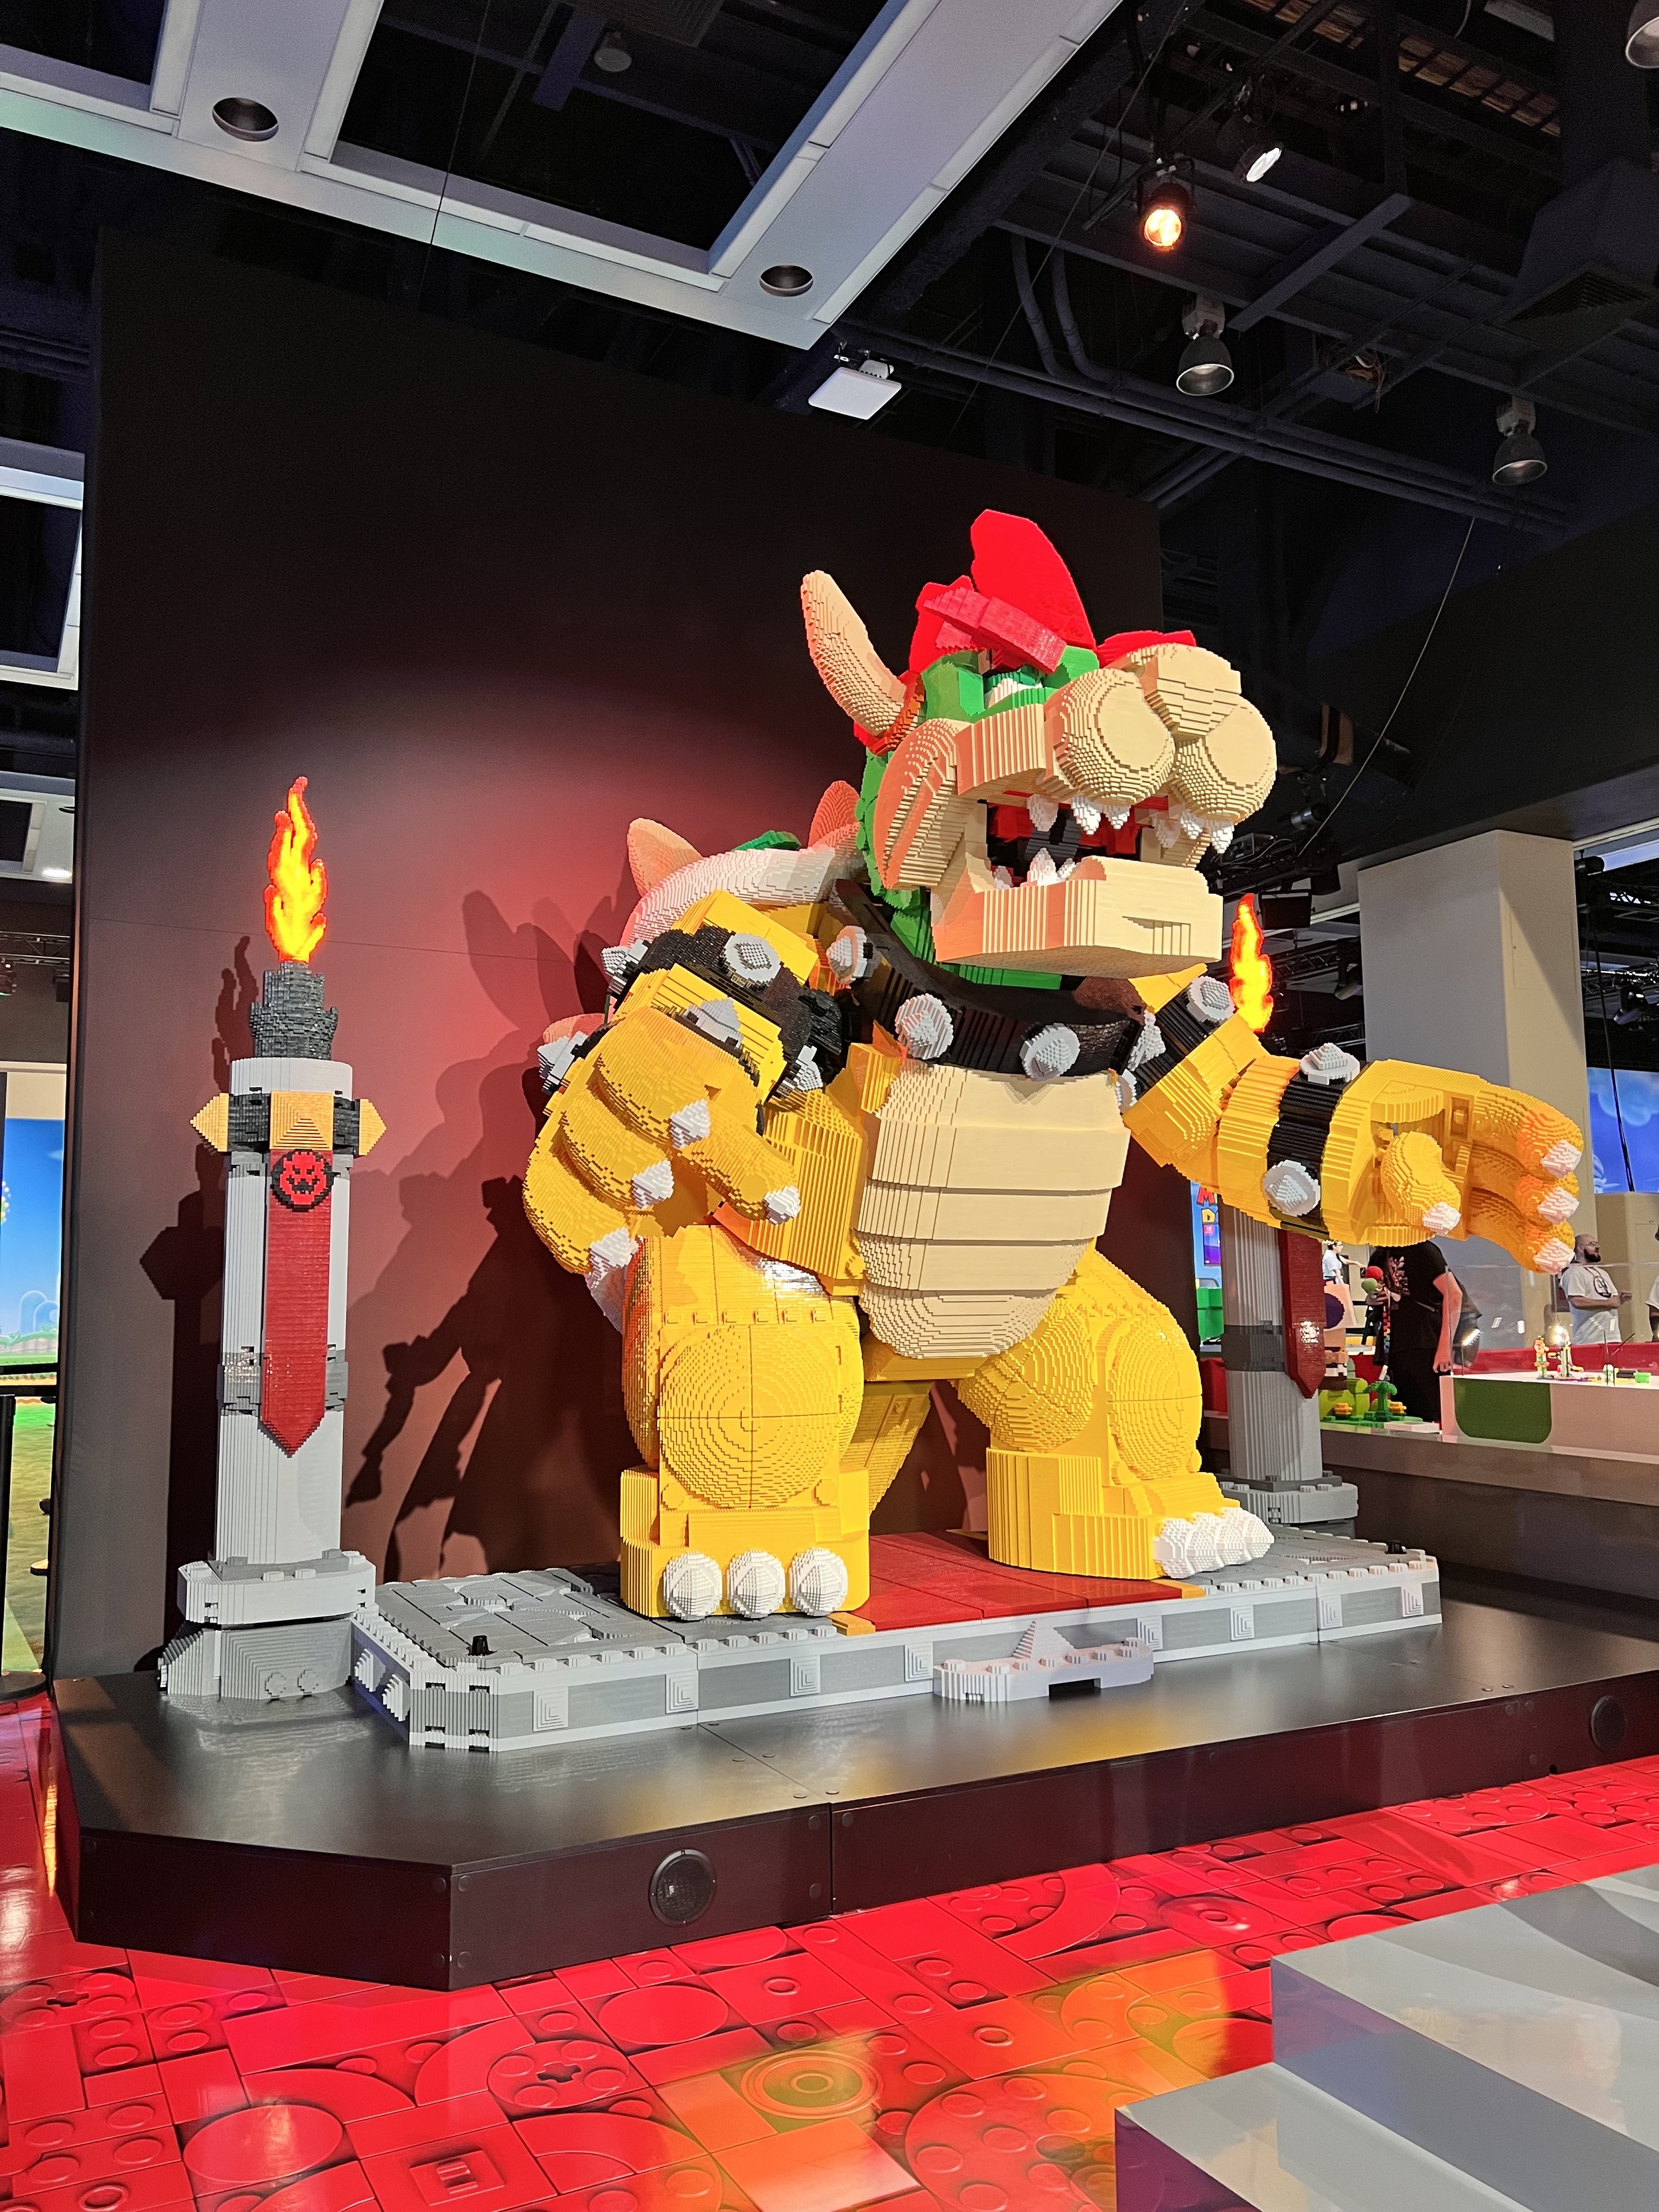  Giant lego Bowser standing on a stage 